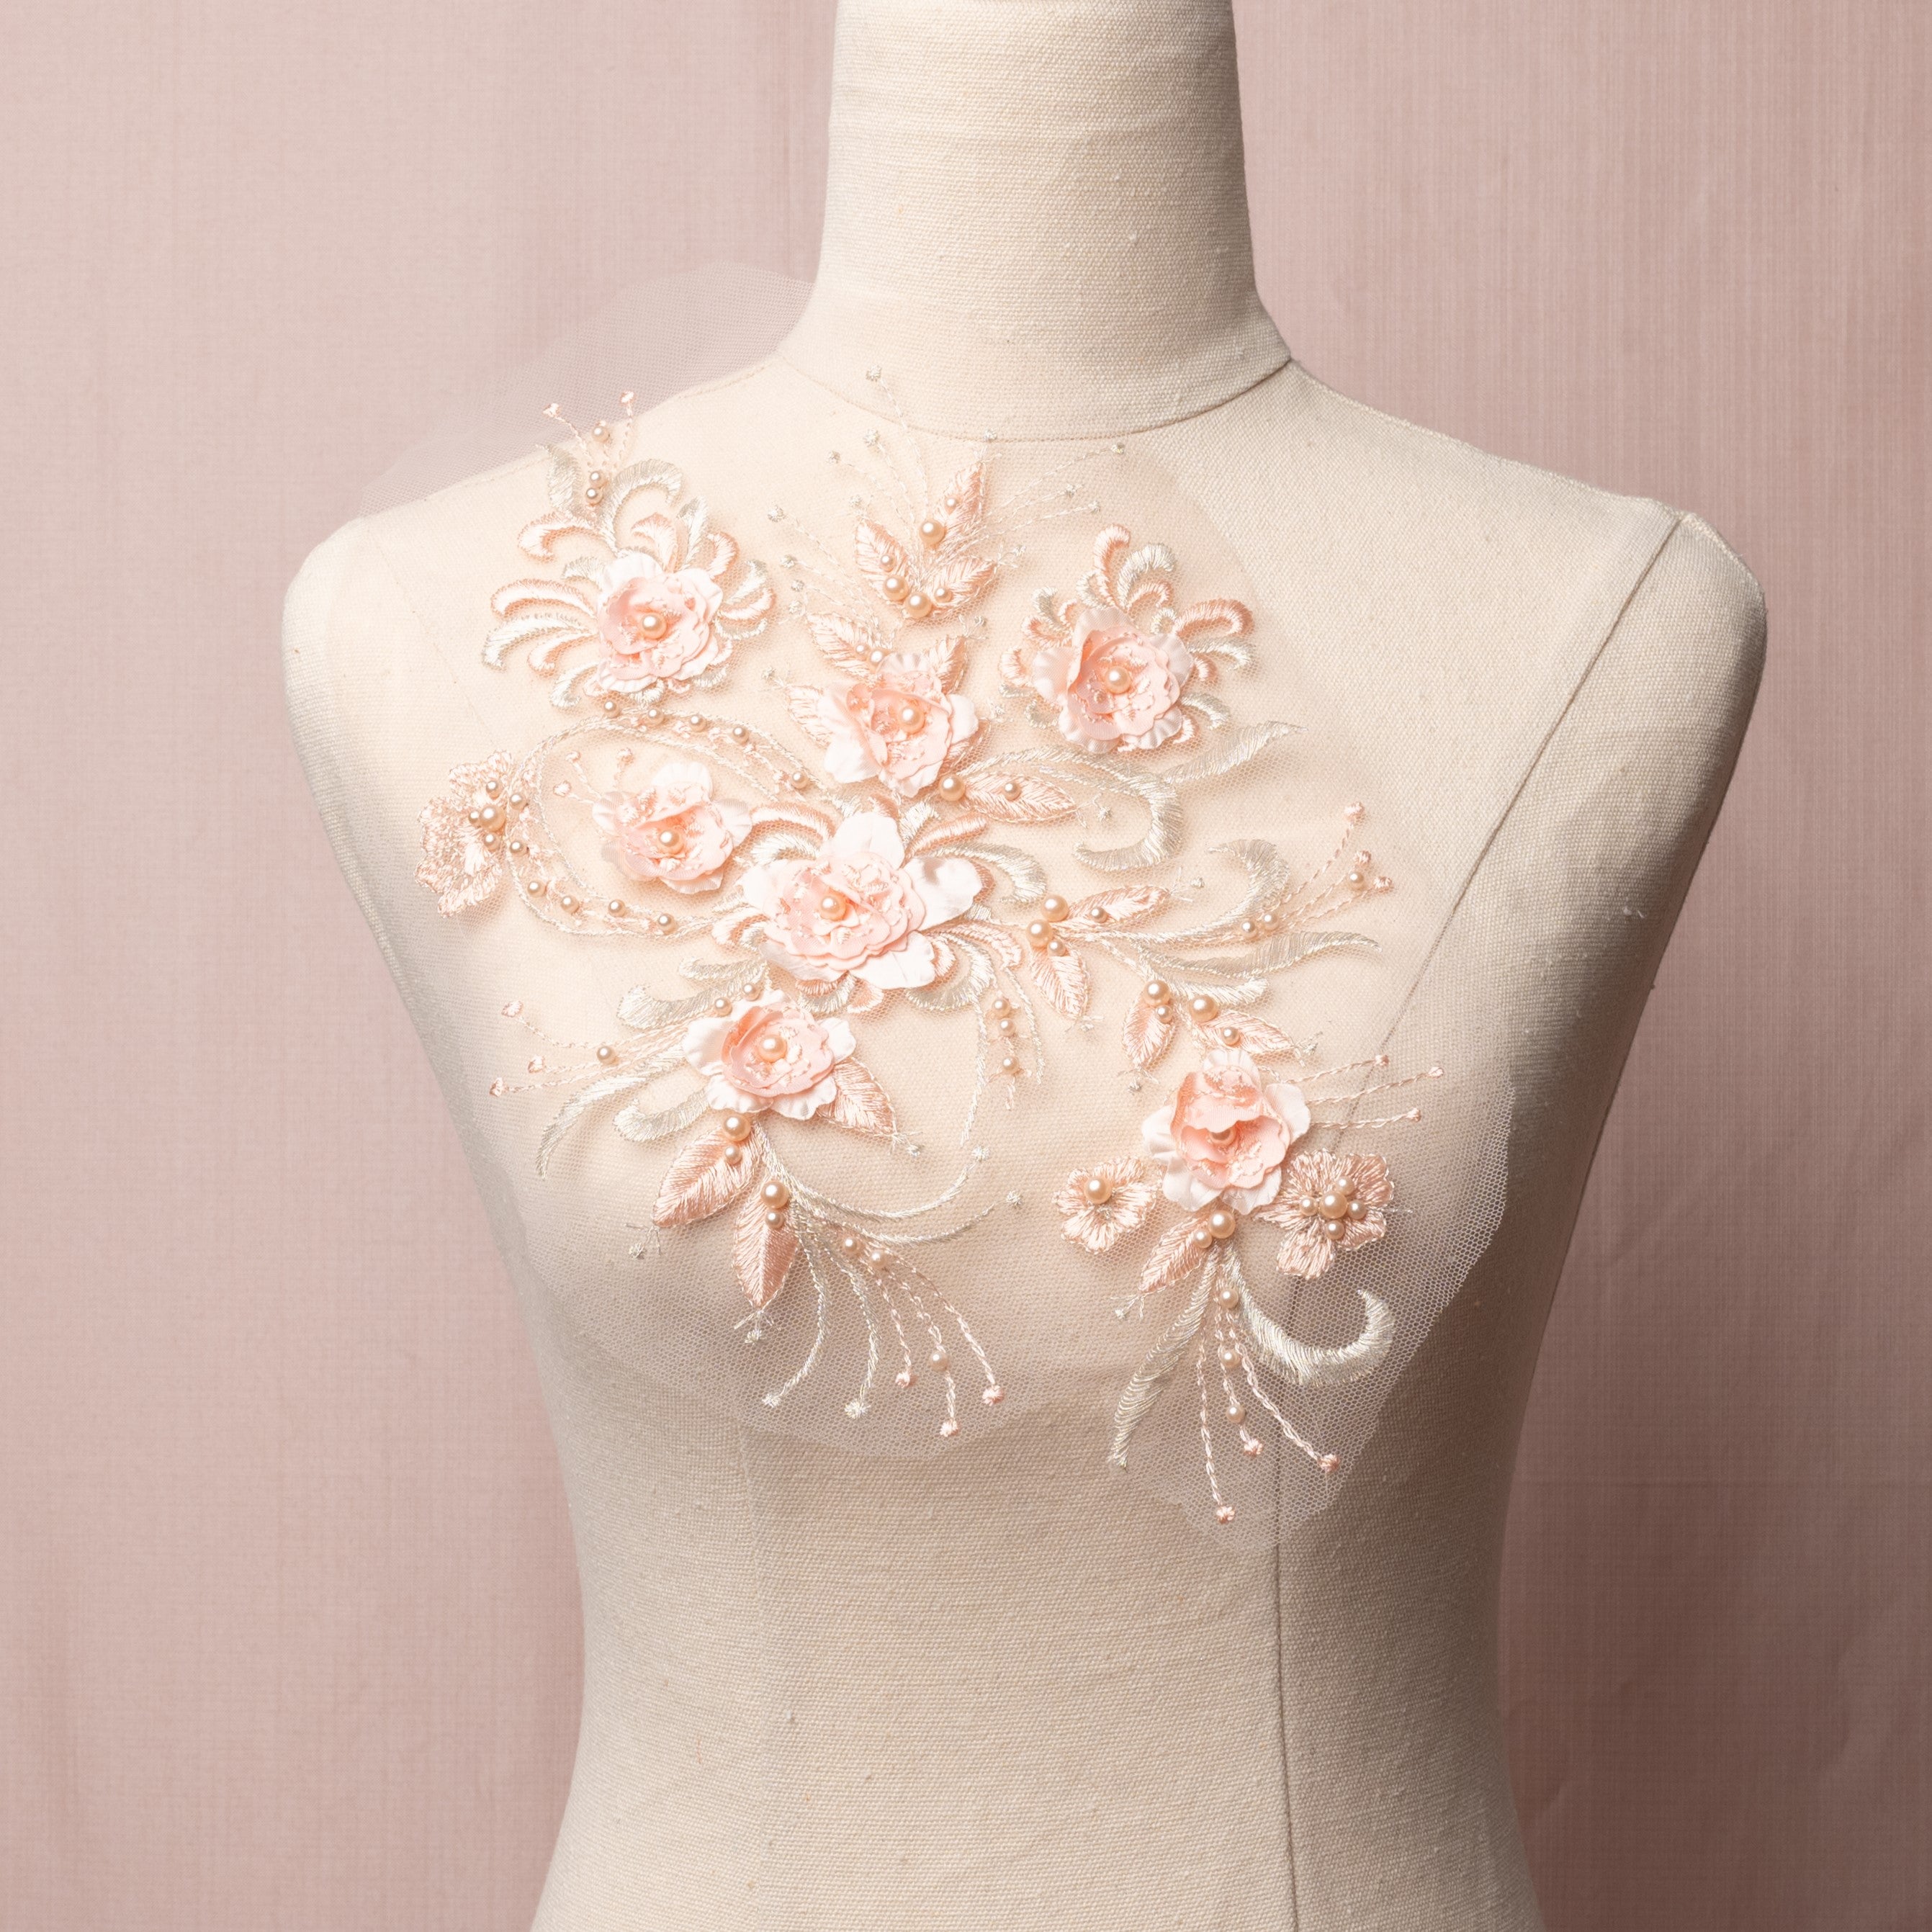 An embroidered apricot applique on net with 3d flowers , pale apricot pearls and silvery swirling stems.  